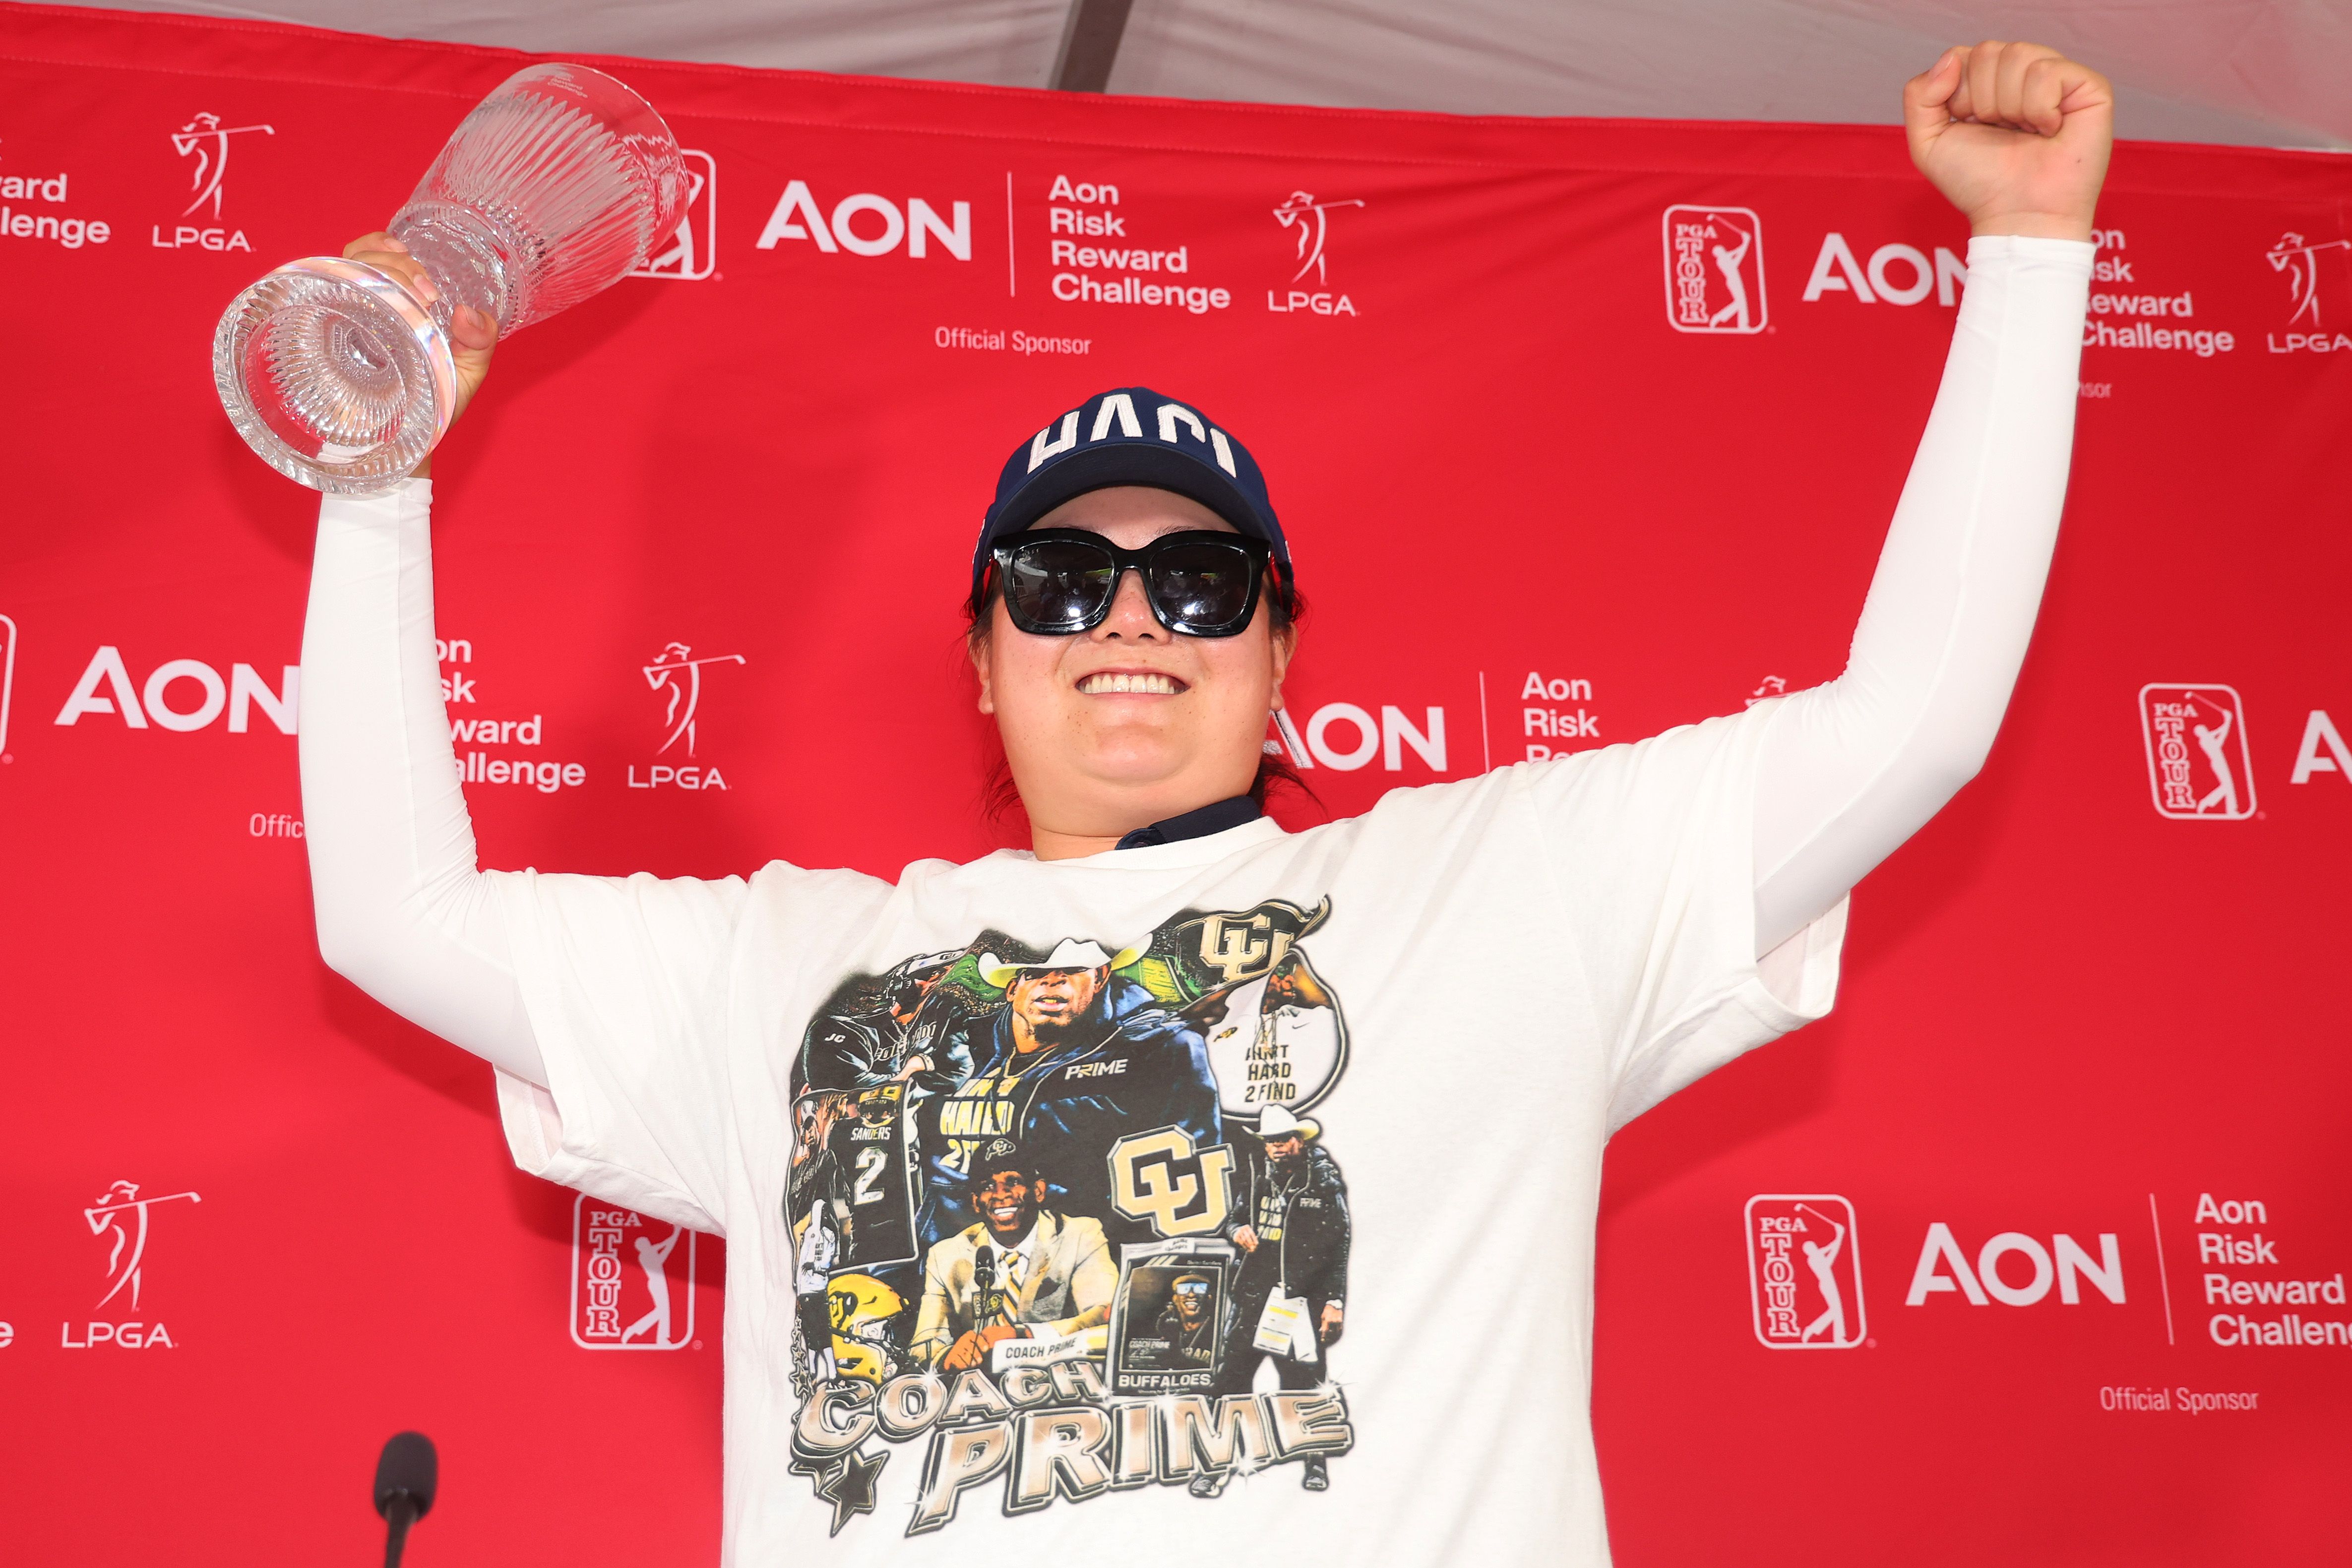 Angel Yin, donned in a Deion Sanders shirt and sunglasses, cheers after winning the 2023 Aon Risk Reward Challenge.